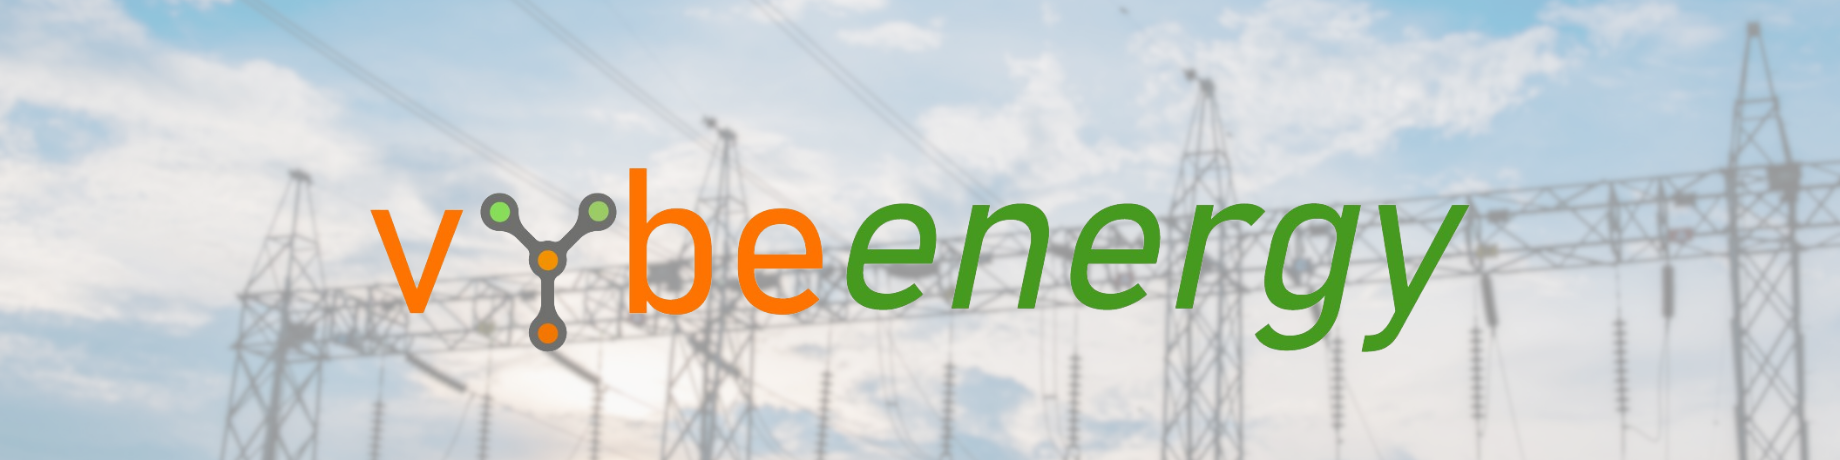 vybe energy logo with utility lines in the background